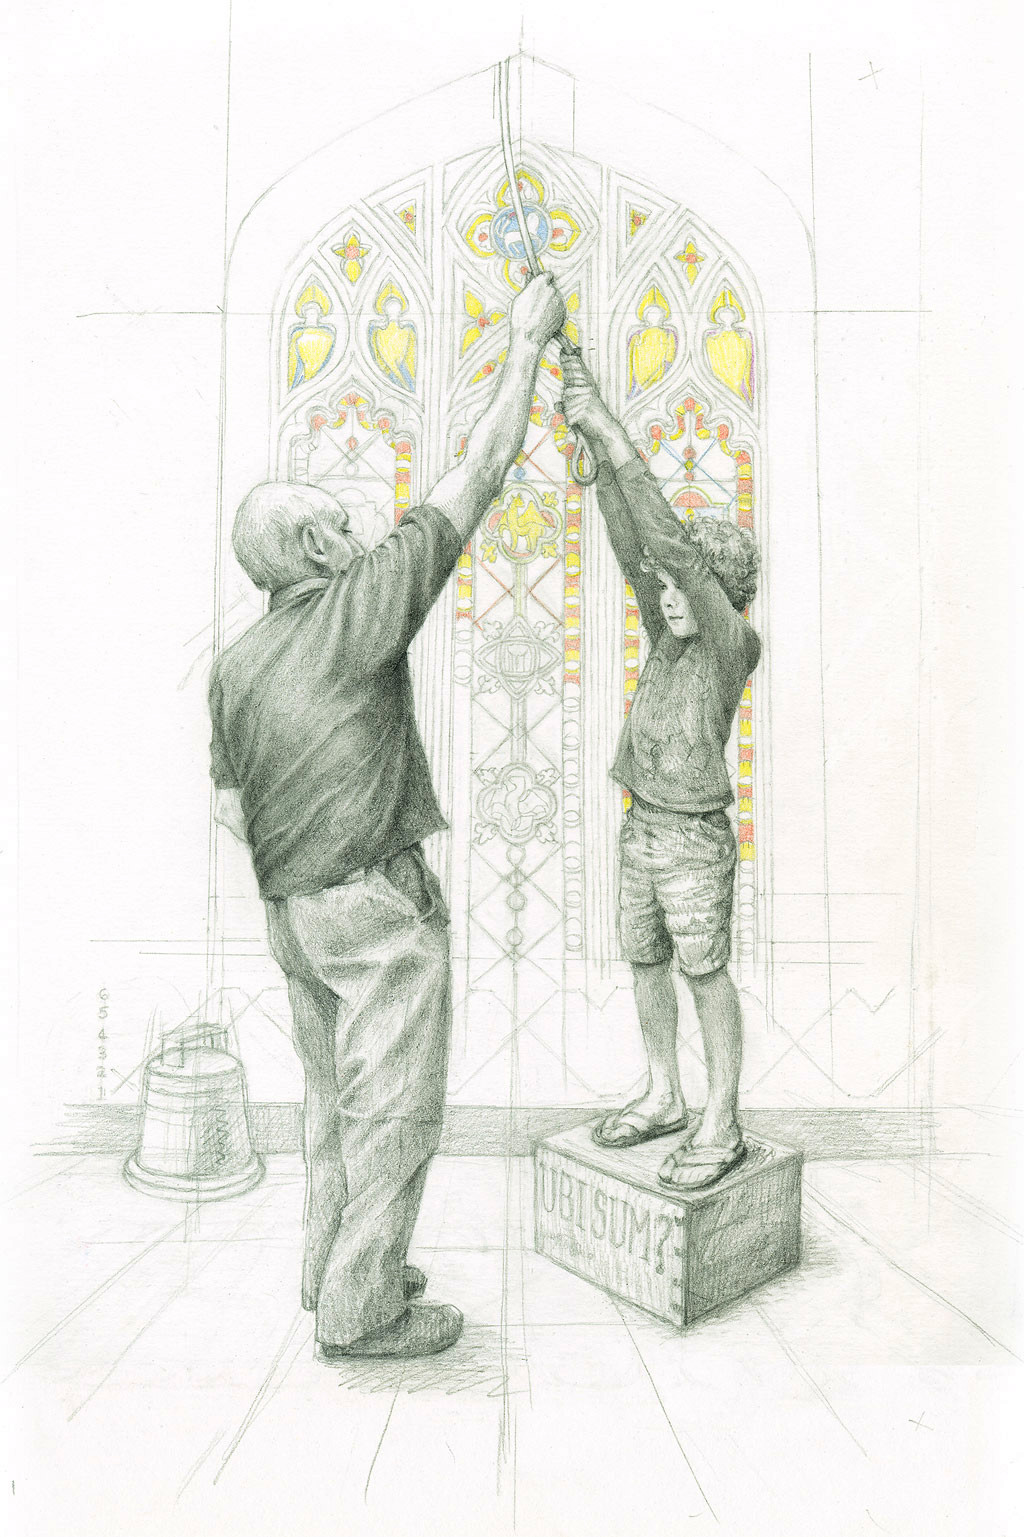 Illustration showing a bell-ringing lesson